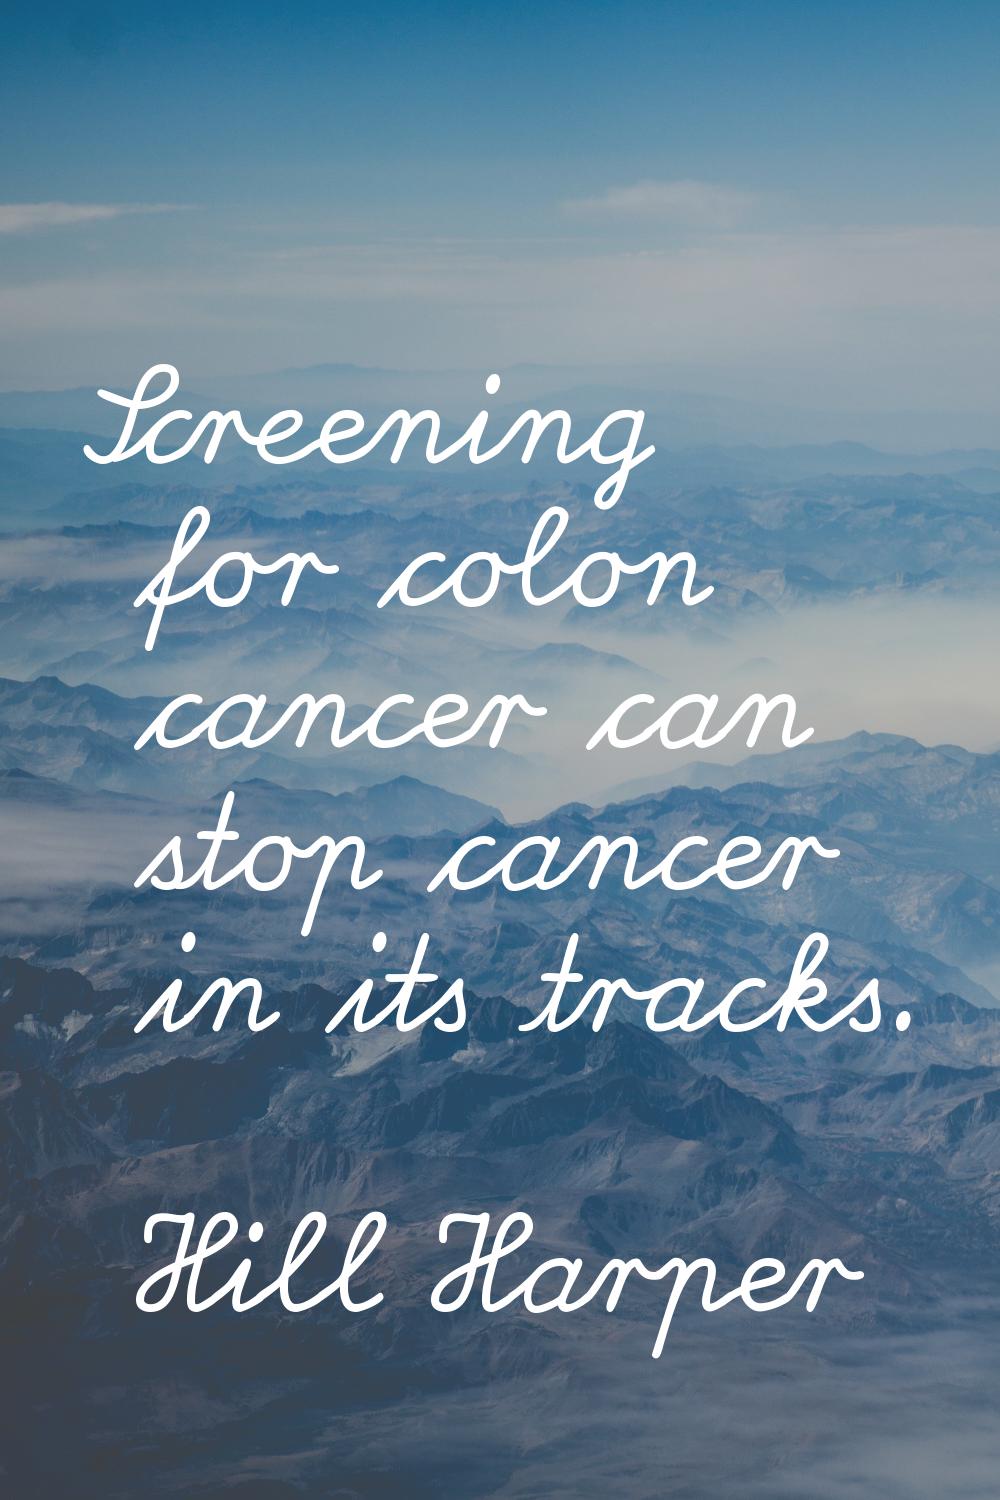 Screening for colon cancer can stop cancer in its tracks.